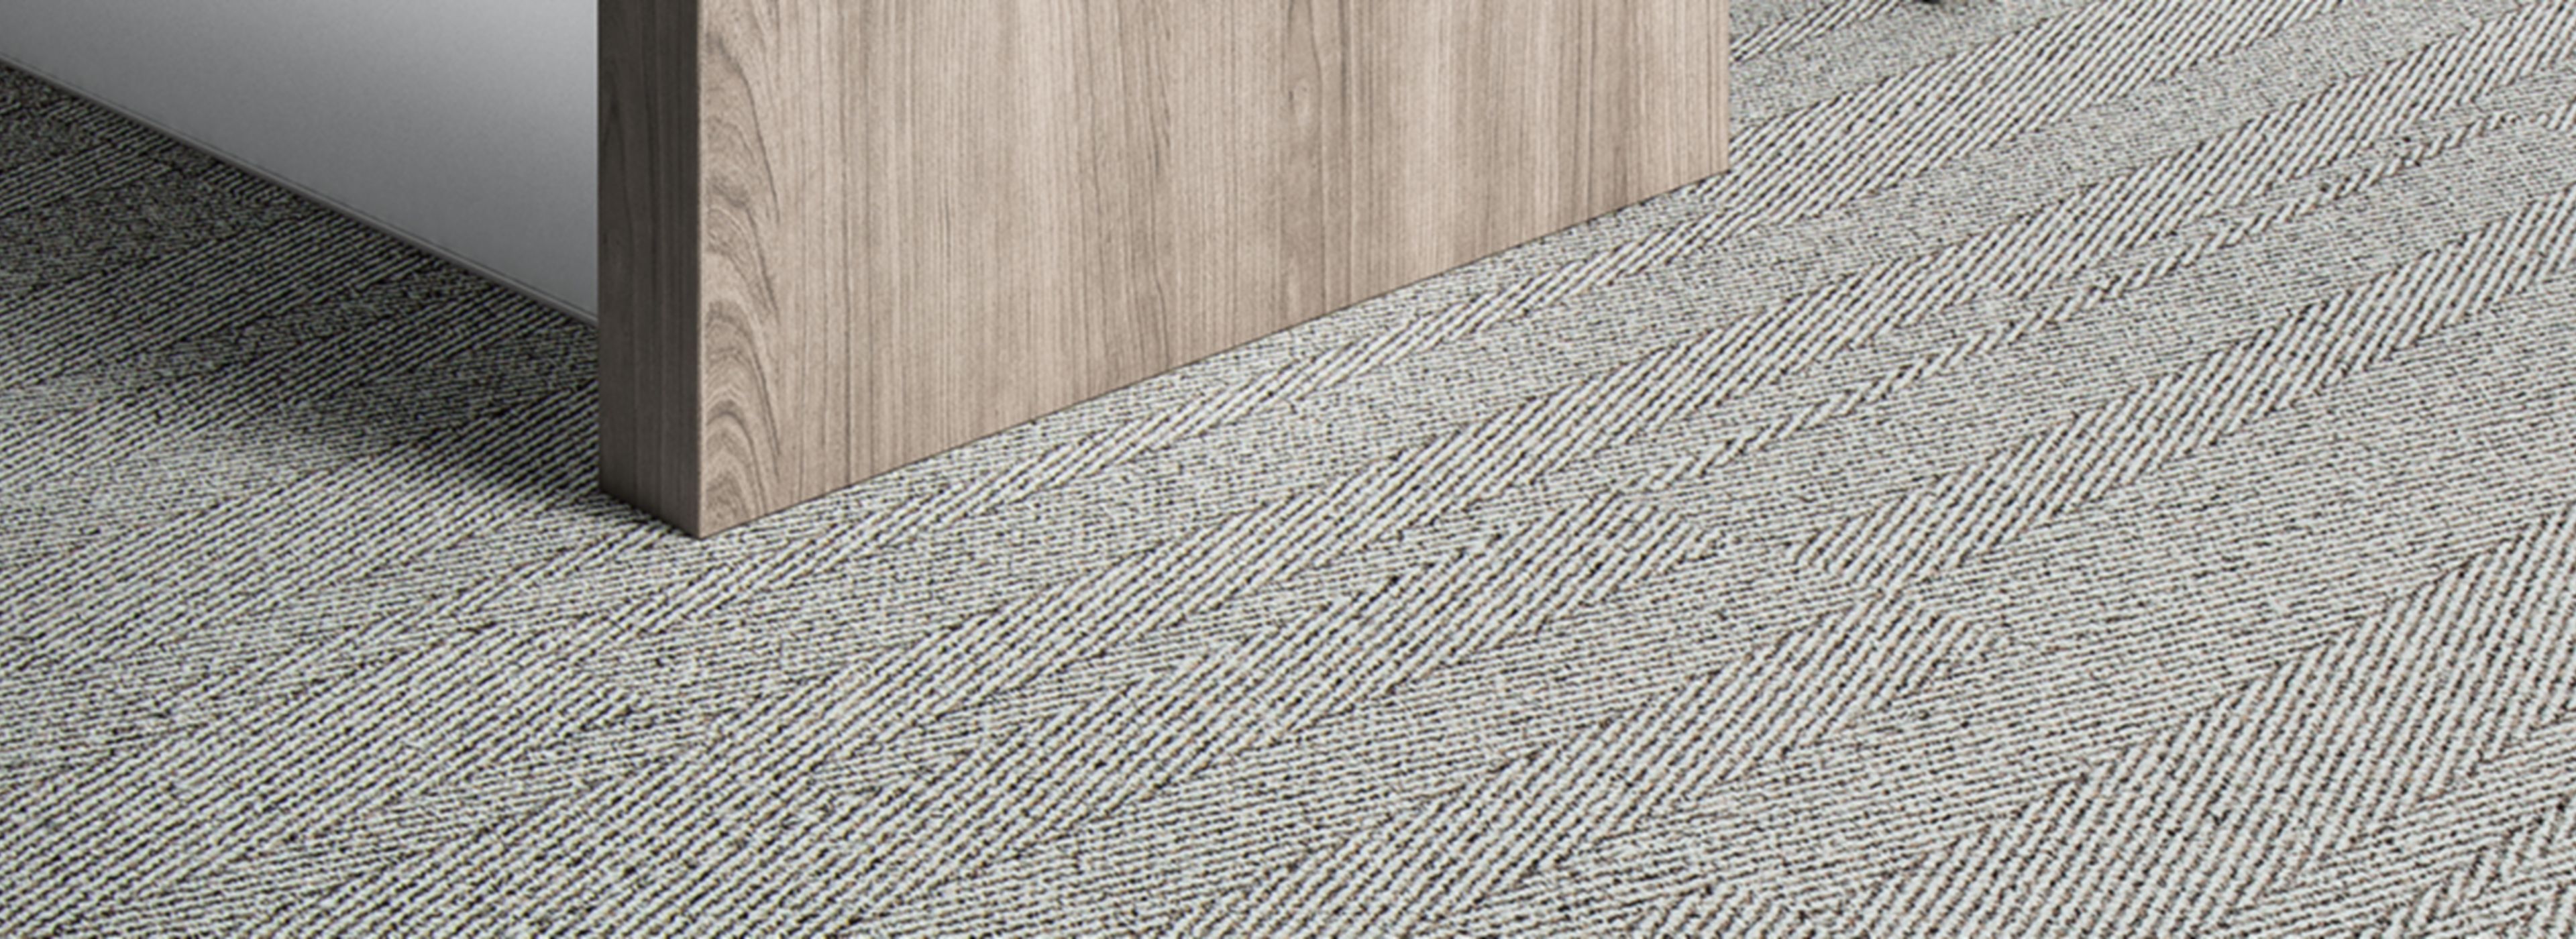 Interface Stitch in Timeplank carpet tile  in office with wood desk and chair numéro d’image 1